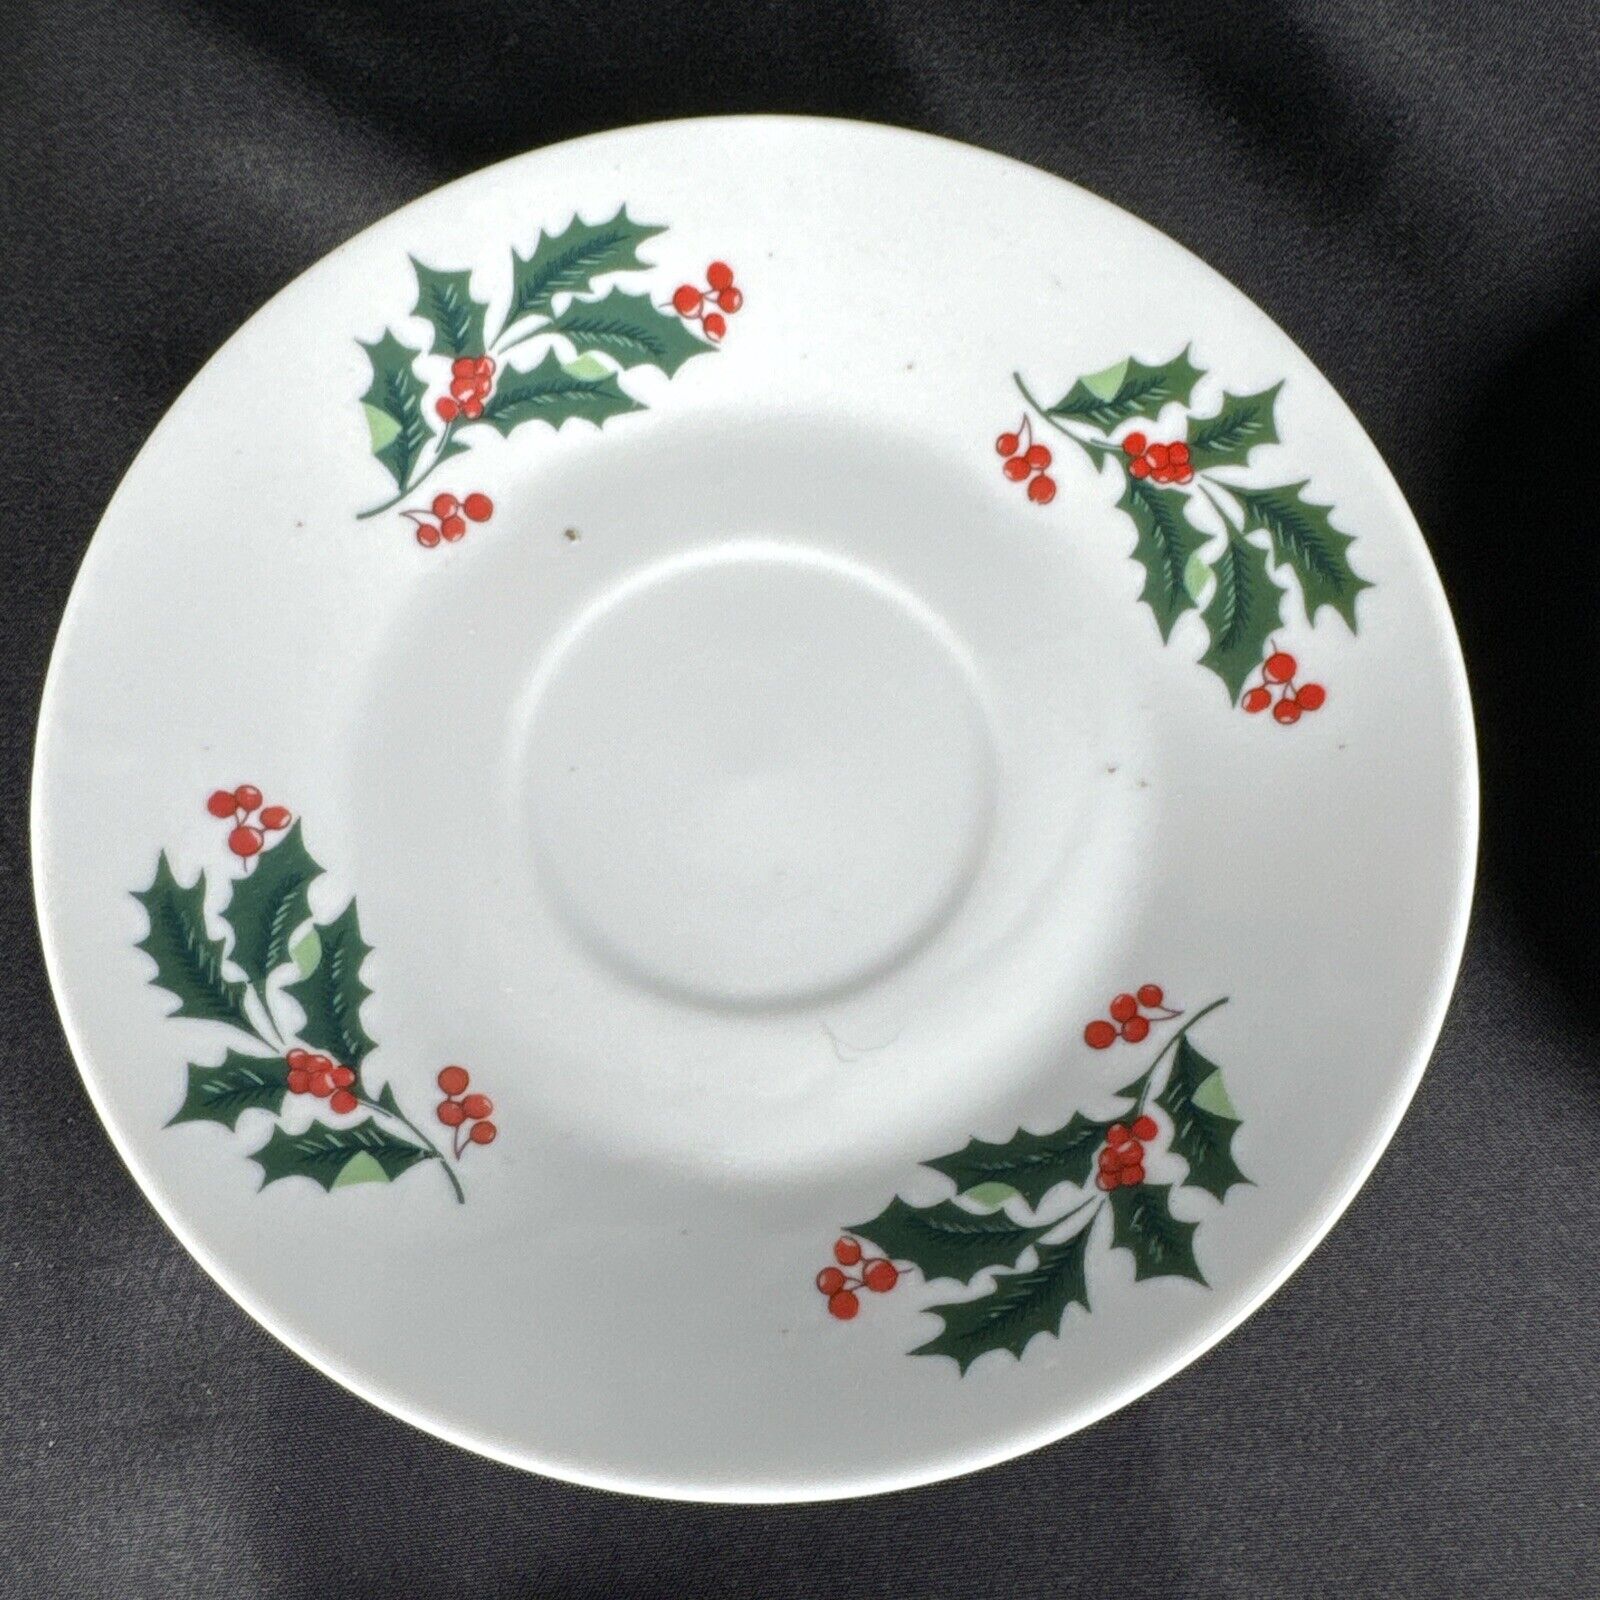 Set Of 8 Cups And Saucers White Porcelain Set Green Holly Leaves Red Berries